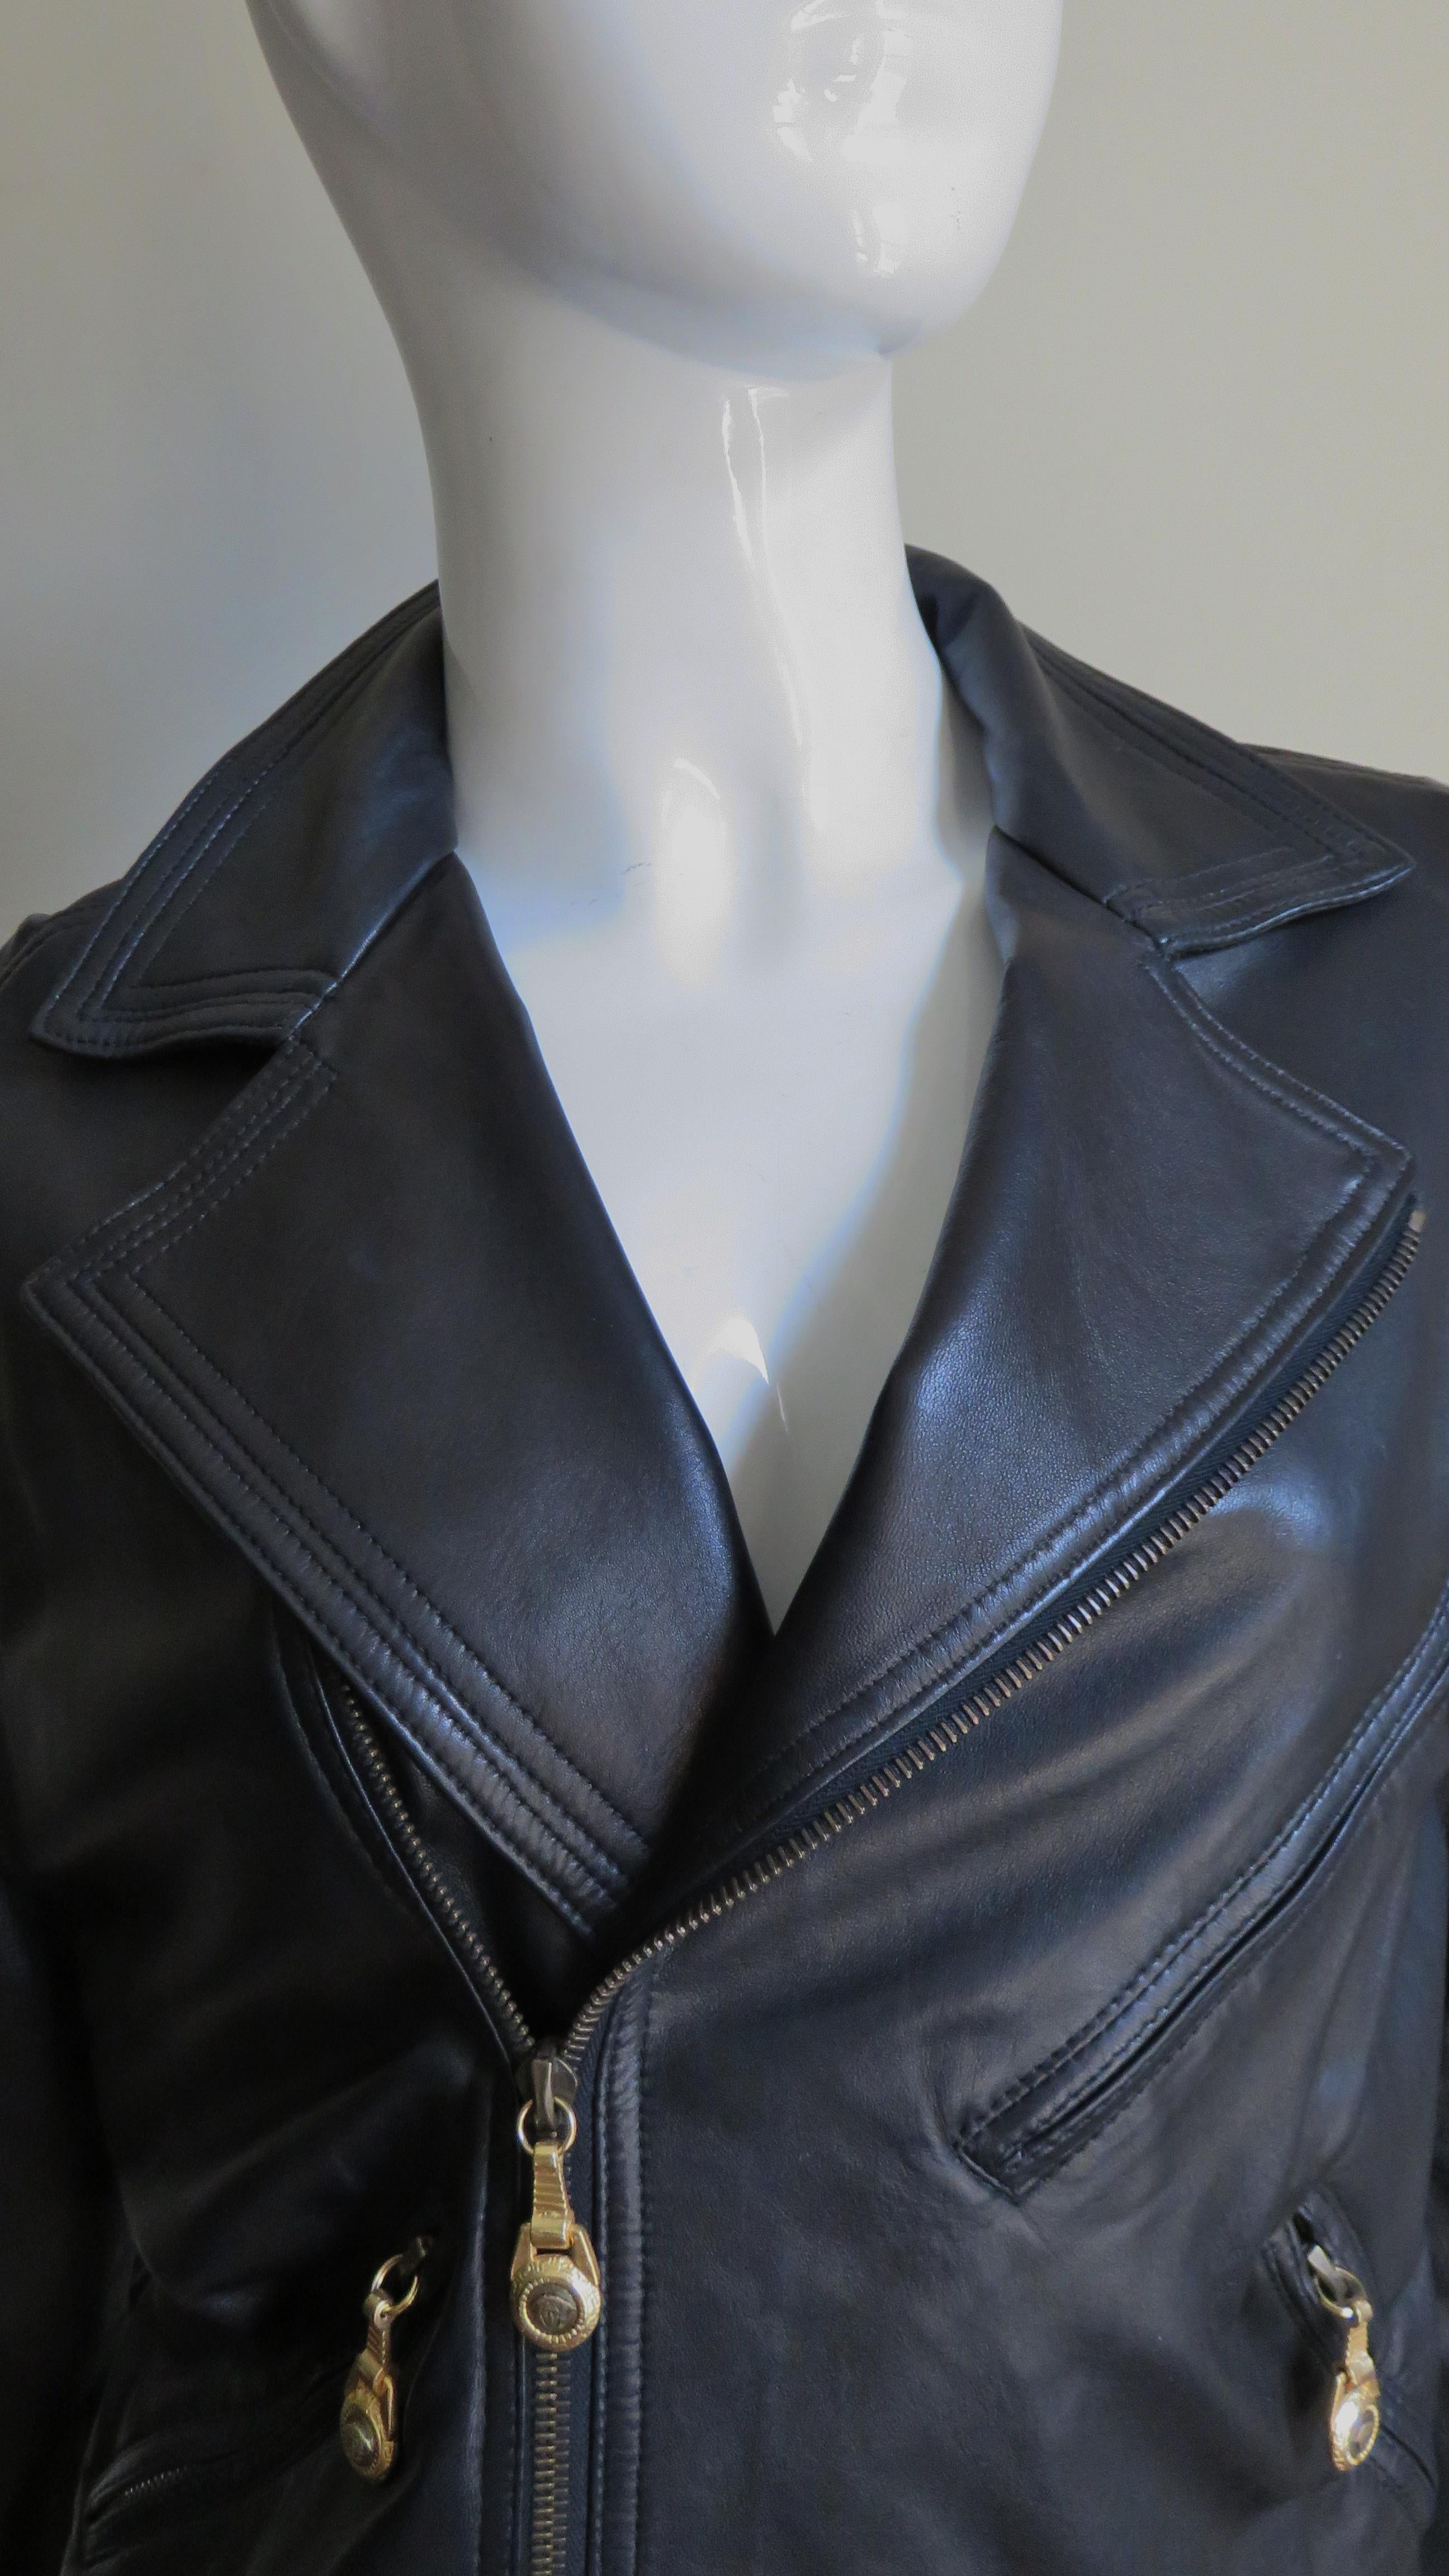 A fabulous black soft leather motorcycle jacket from Gianni Versace.  It has a front zipper, a lapel collar that can be zipped closed, zipper cuffs, a functional front belt with a metal buckle and 3 zipper front pockets with metal Medusa head